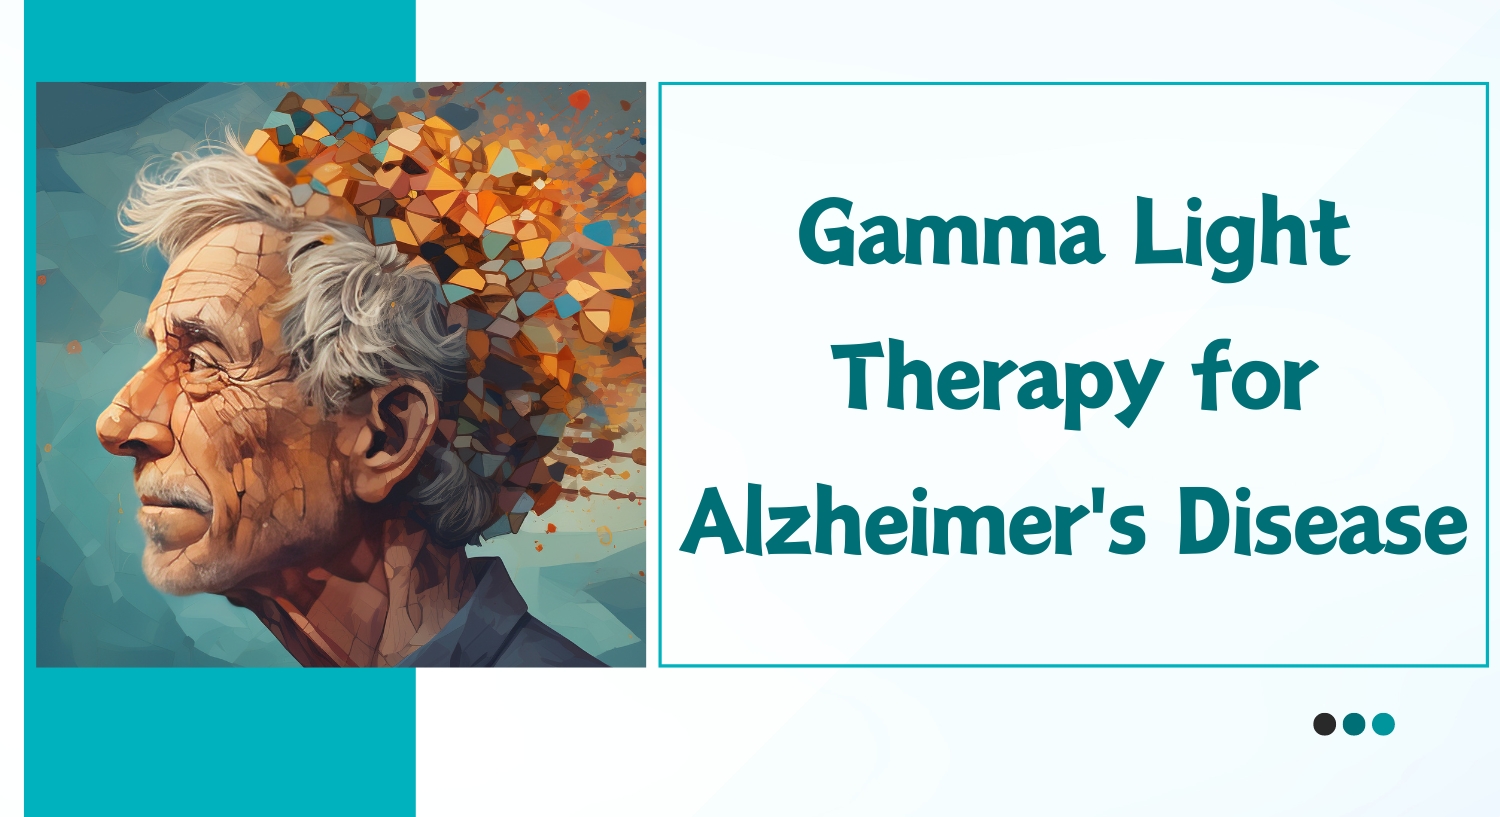 A Ray of Hope: The Power of Gamma Light Therapy for Alzheimer's